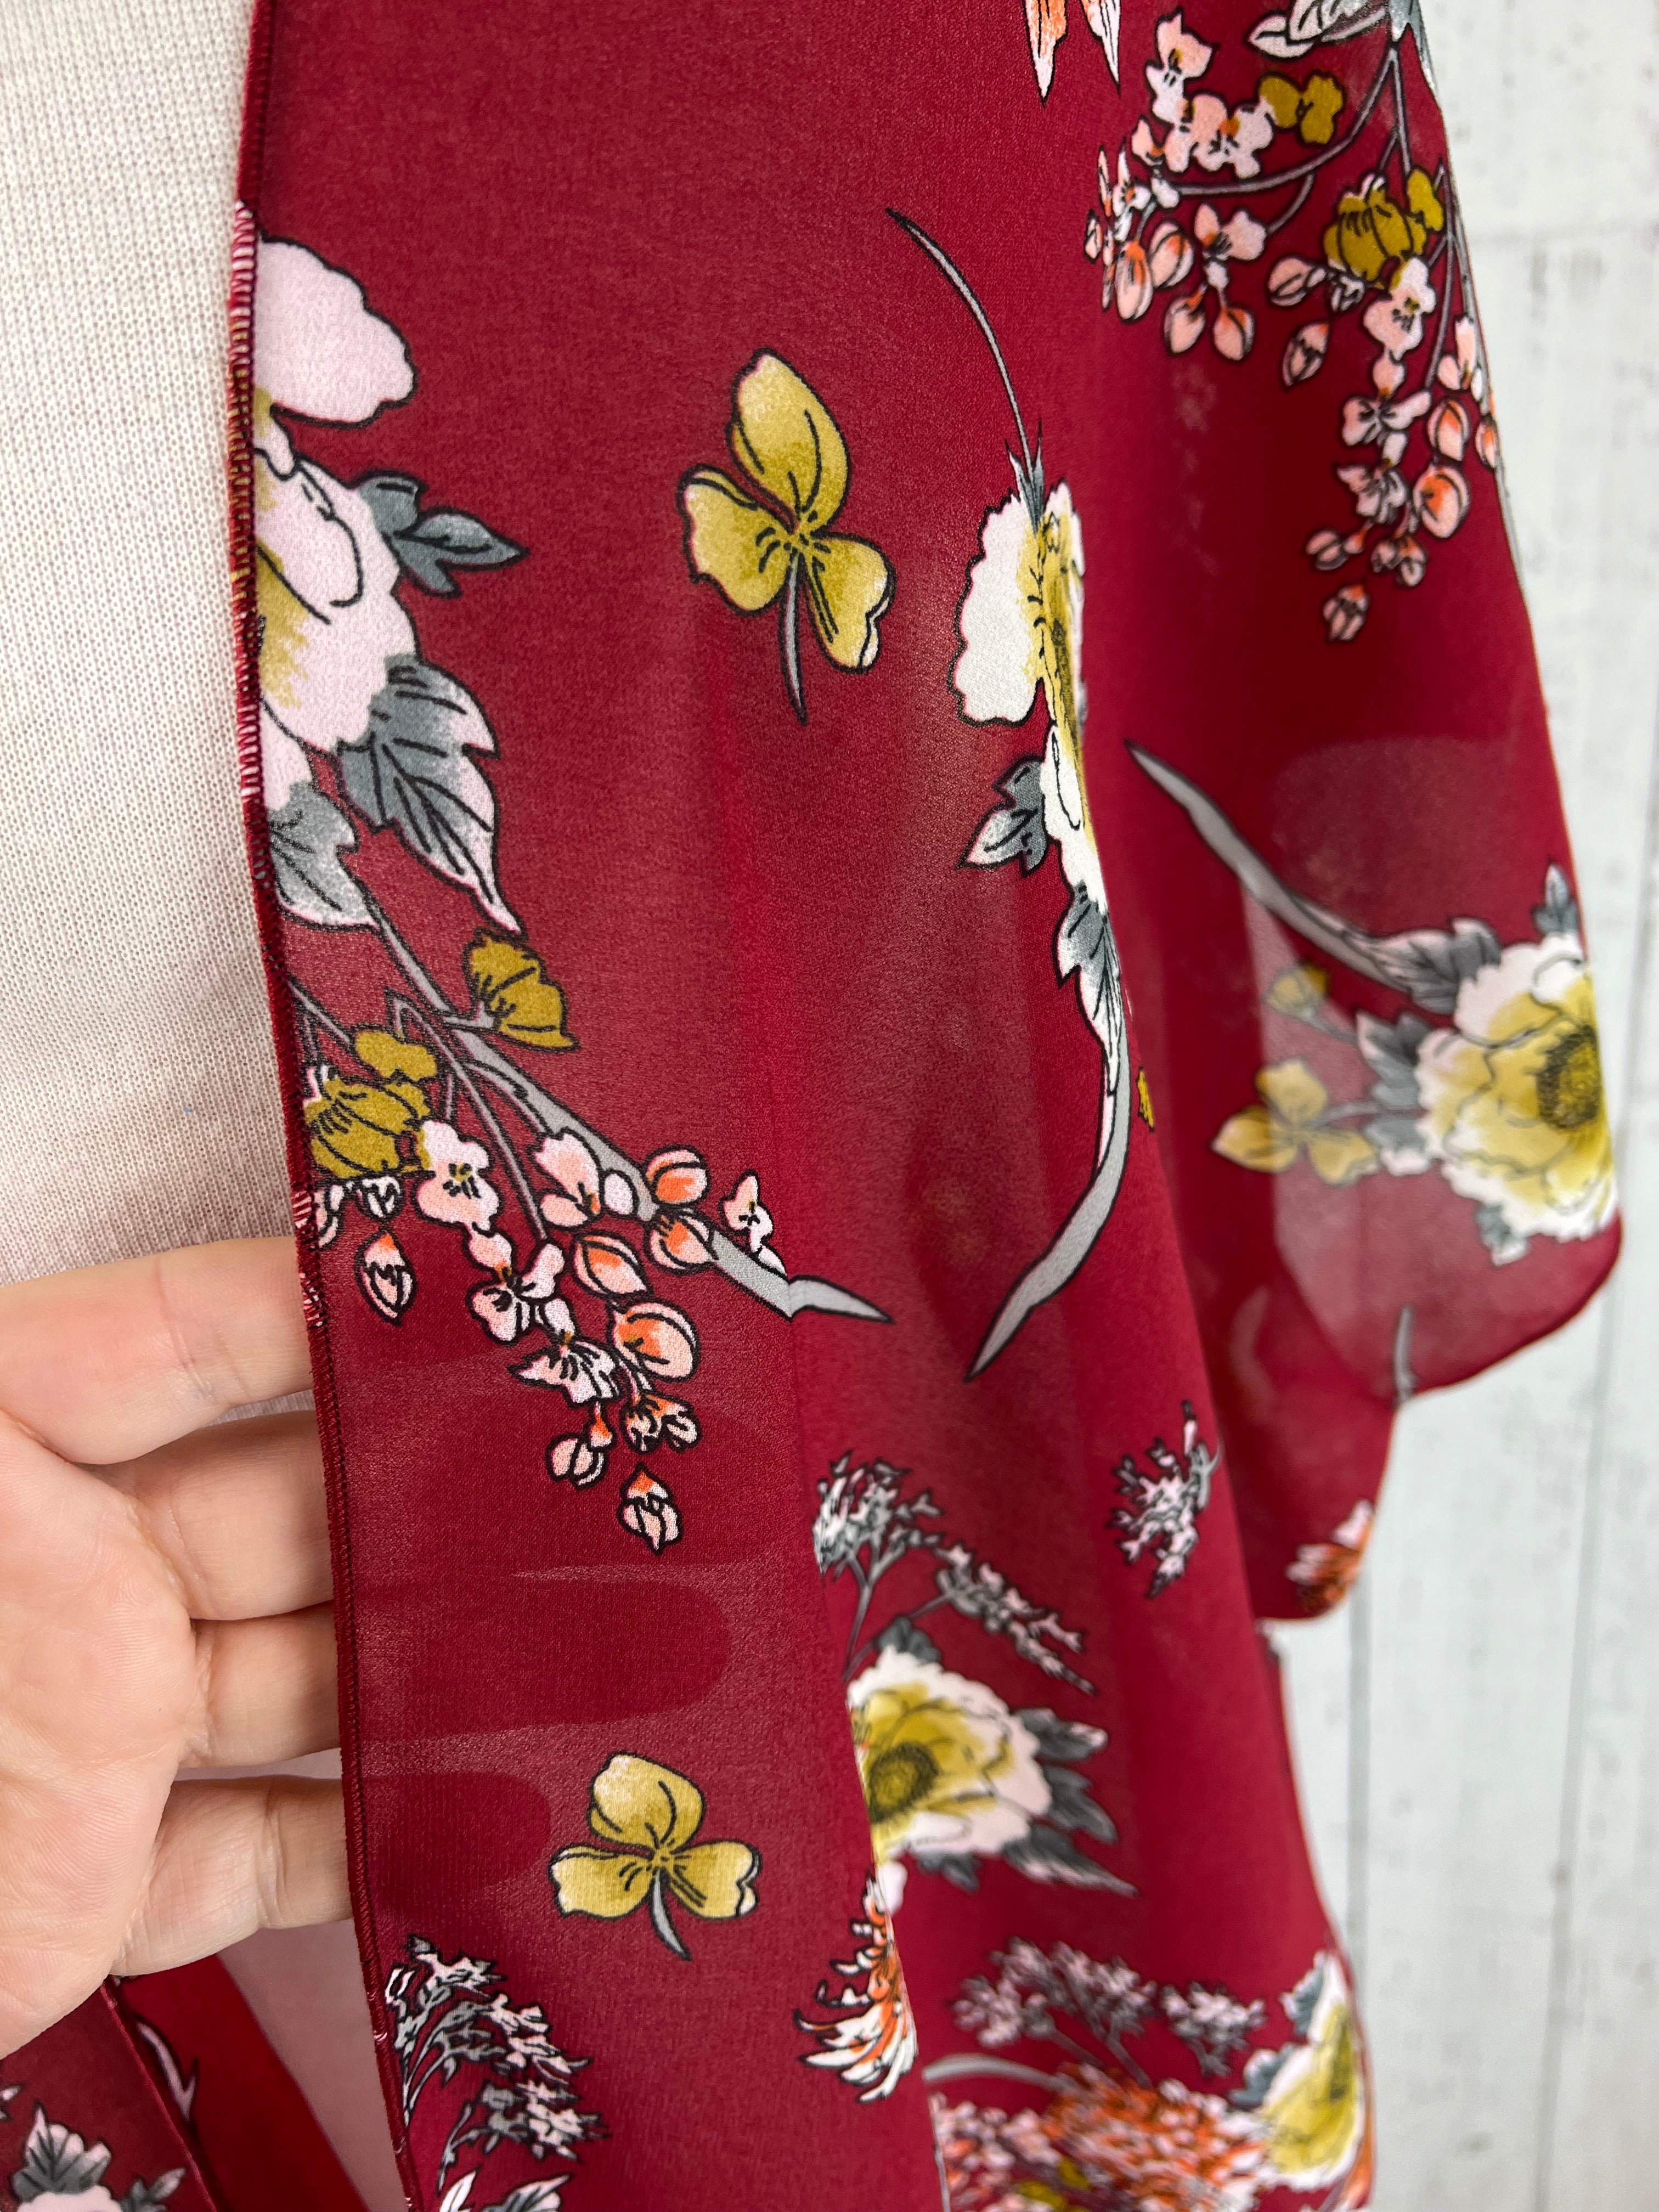 Maroon Floral Sleeved Kimono Various Lengths